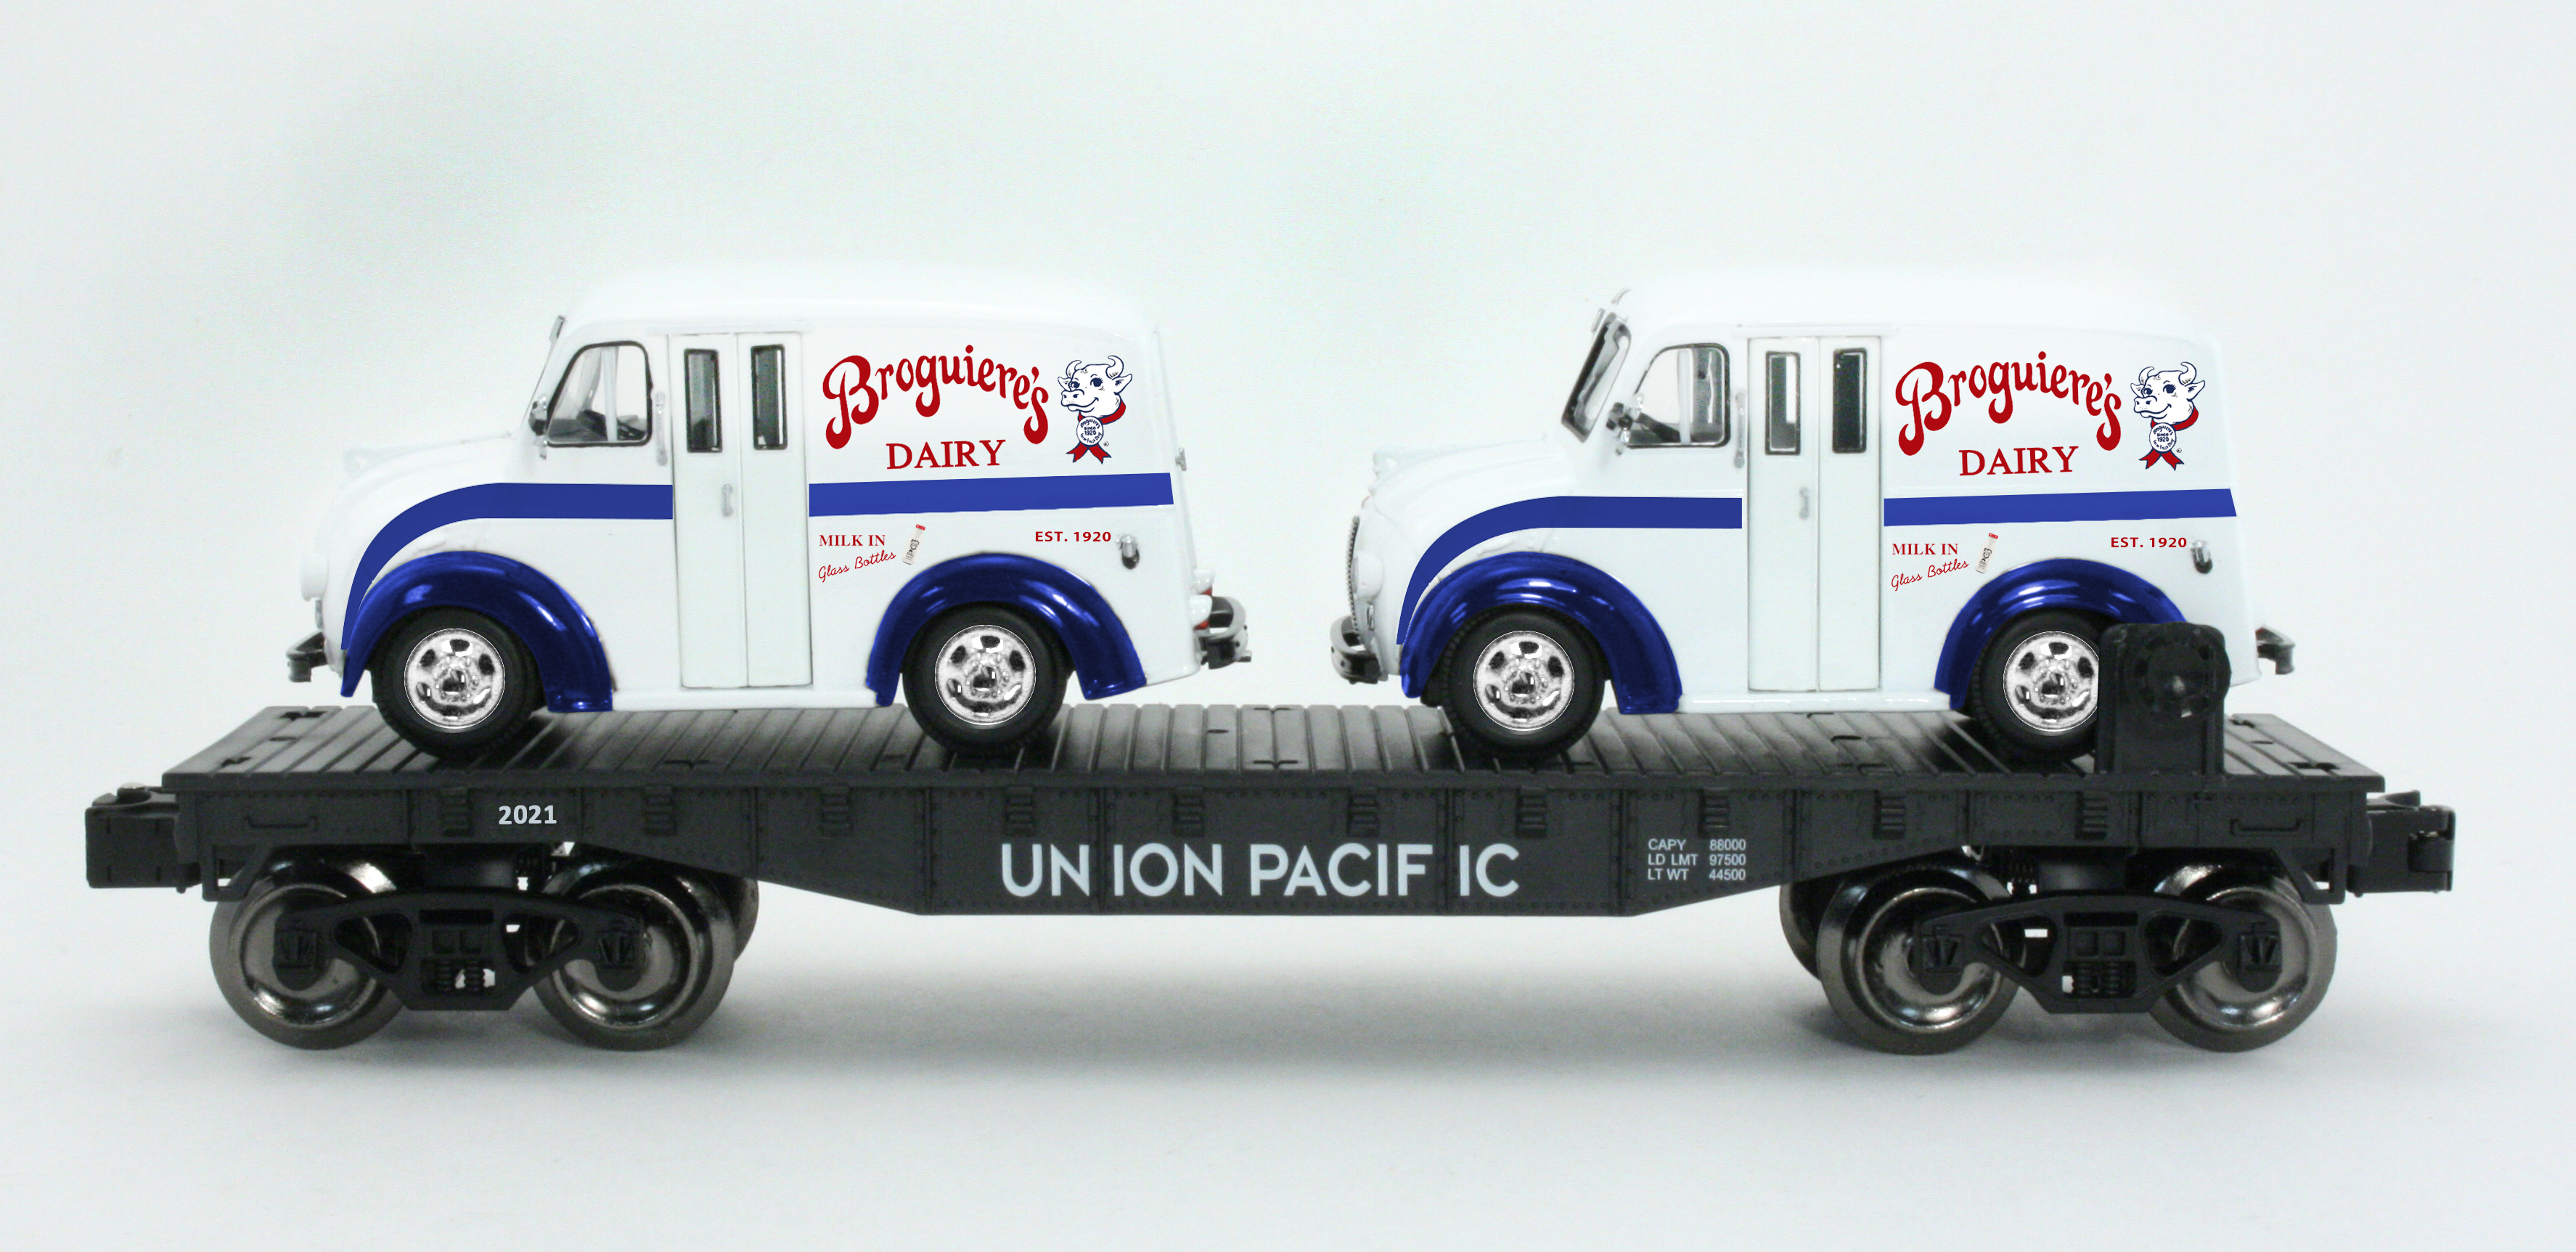 Limited Edition O gauge Union Pacific Flat Car with Broguiere's Dairy 1950's DIVCO milk vans